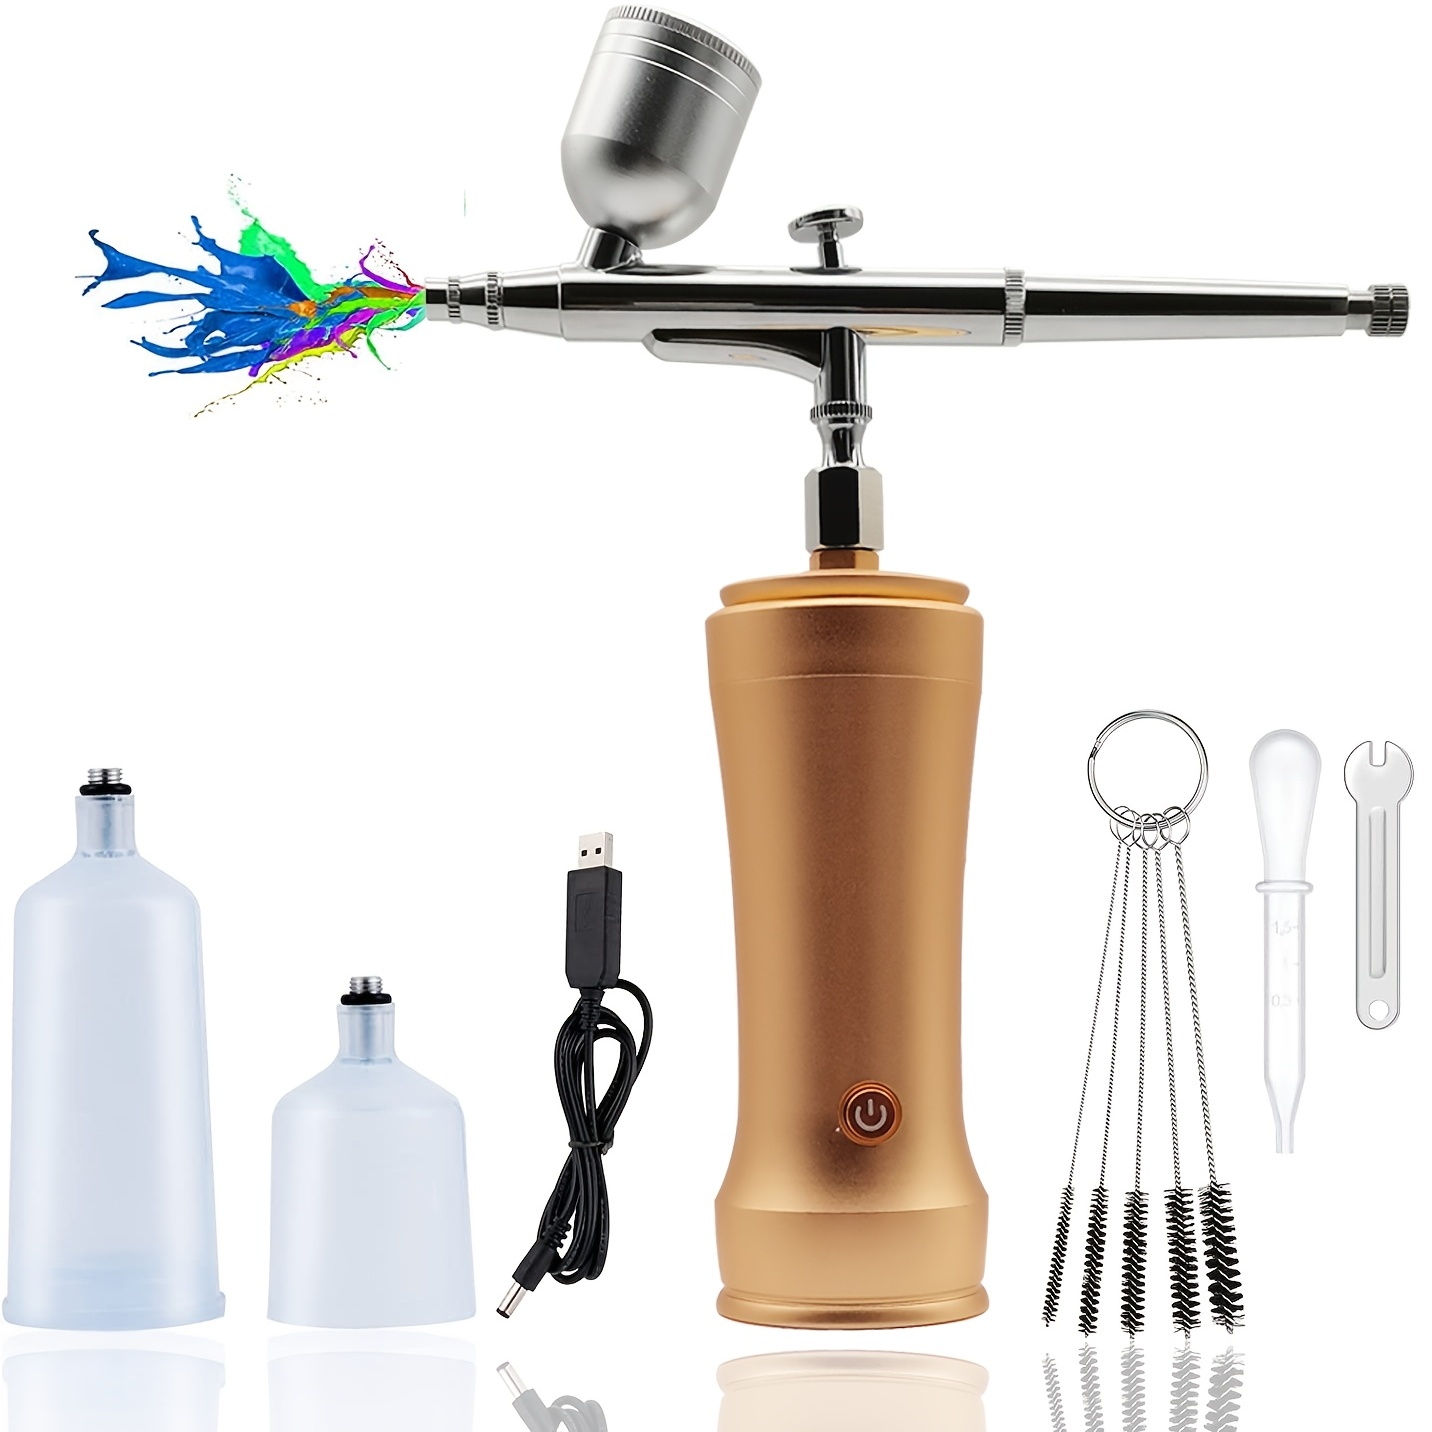 Daakro Cordless Airbrush Set - Portable Rechargeable Airbrush Kit with  Compressor, Auto Handheld Air Brush Gun Sets for Makeup, Nail Art, Cake  Decor